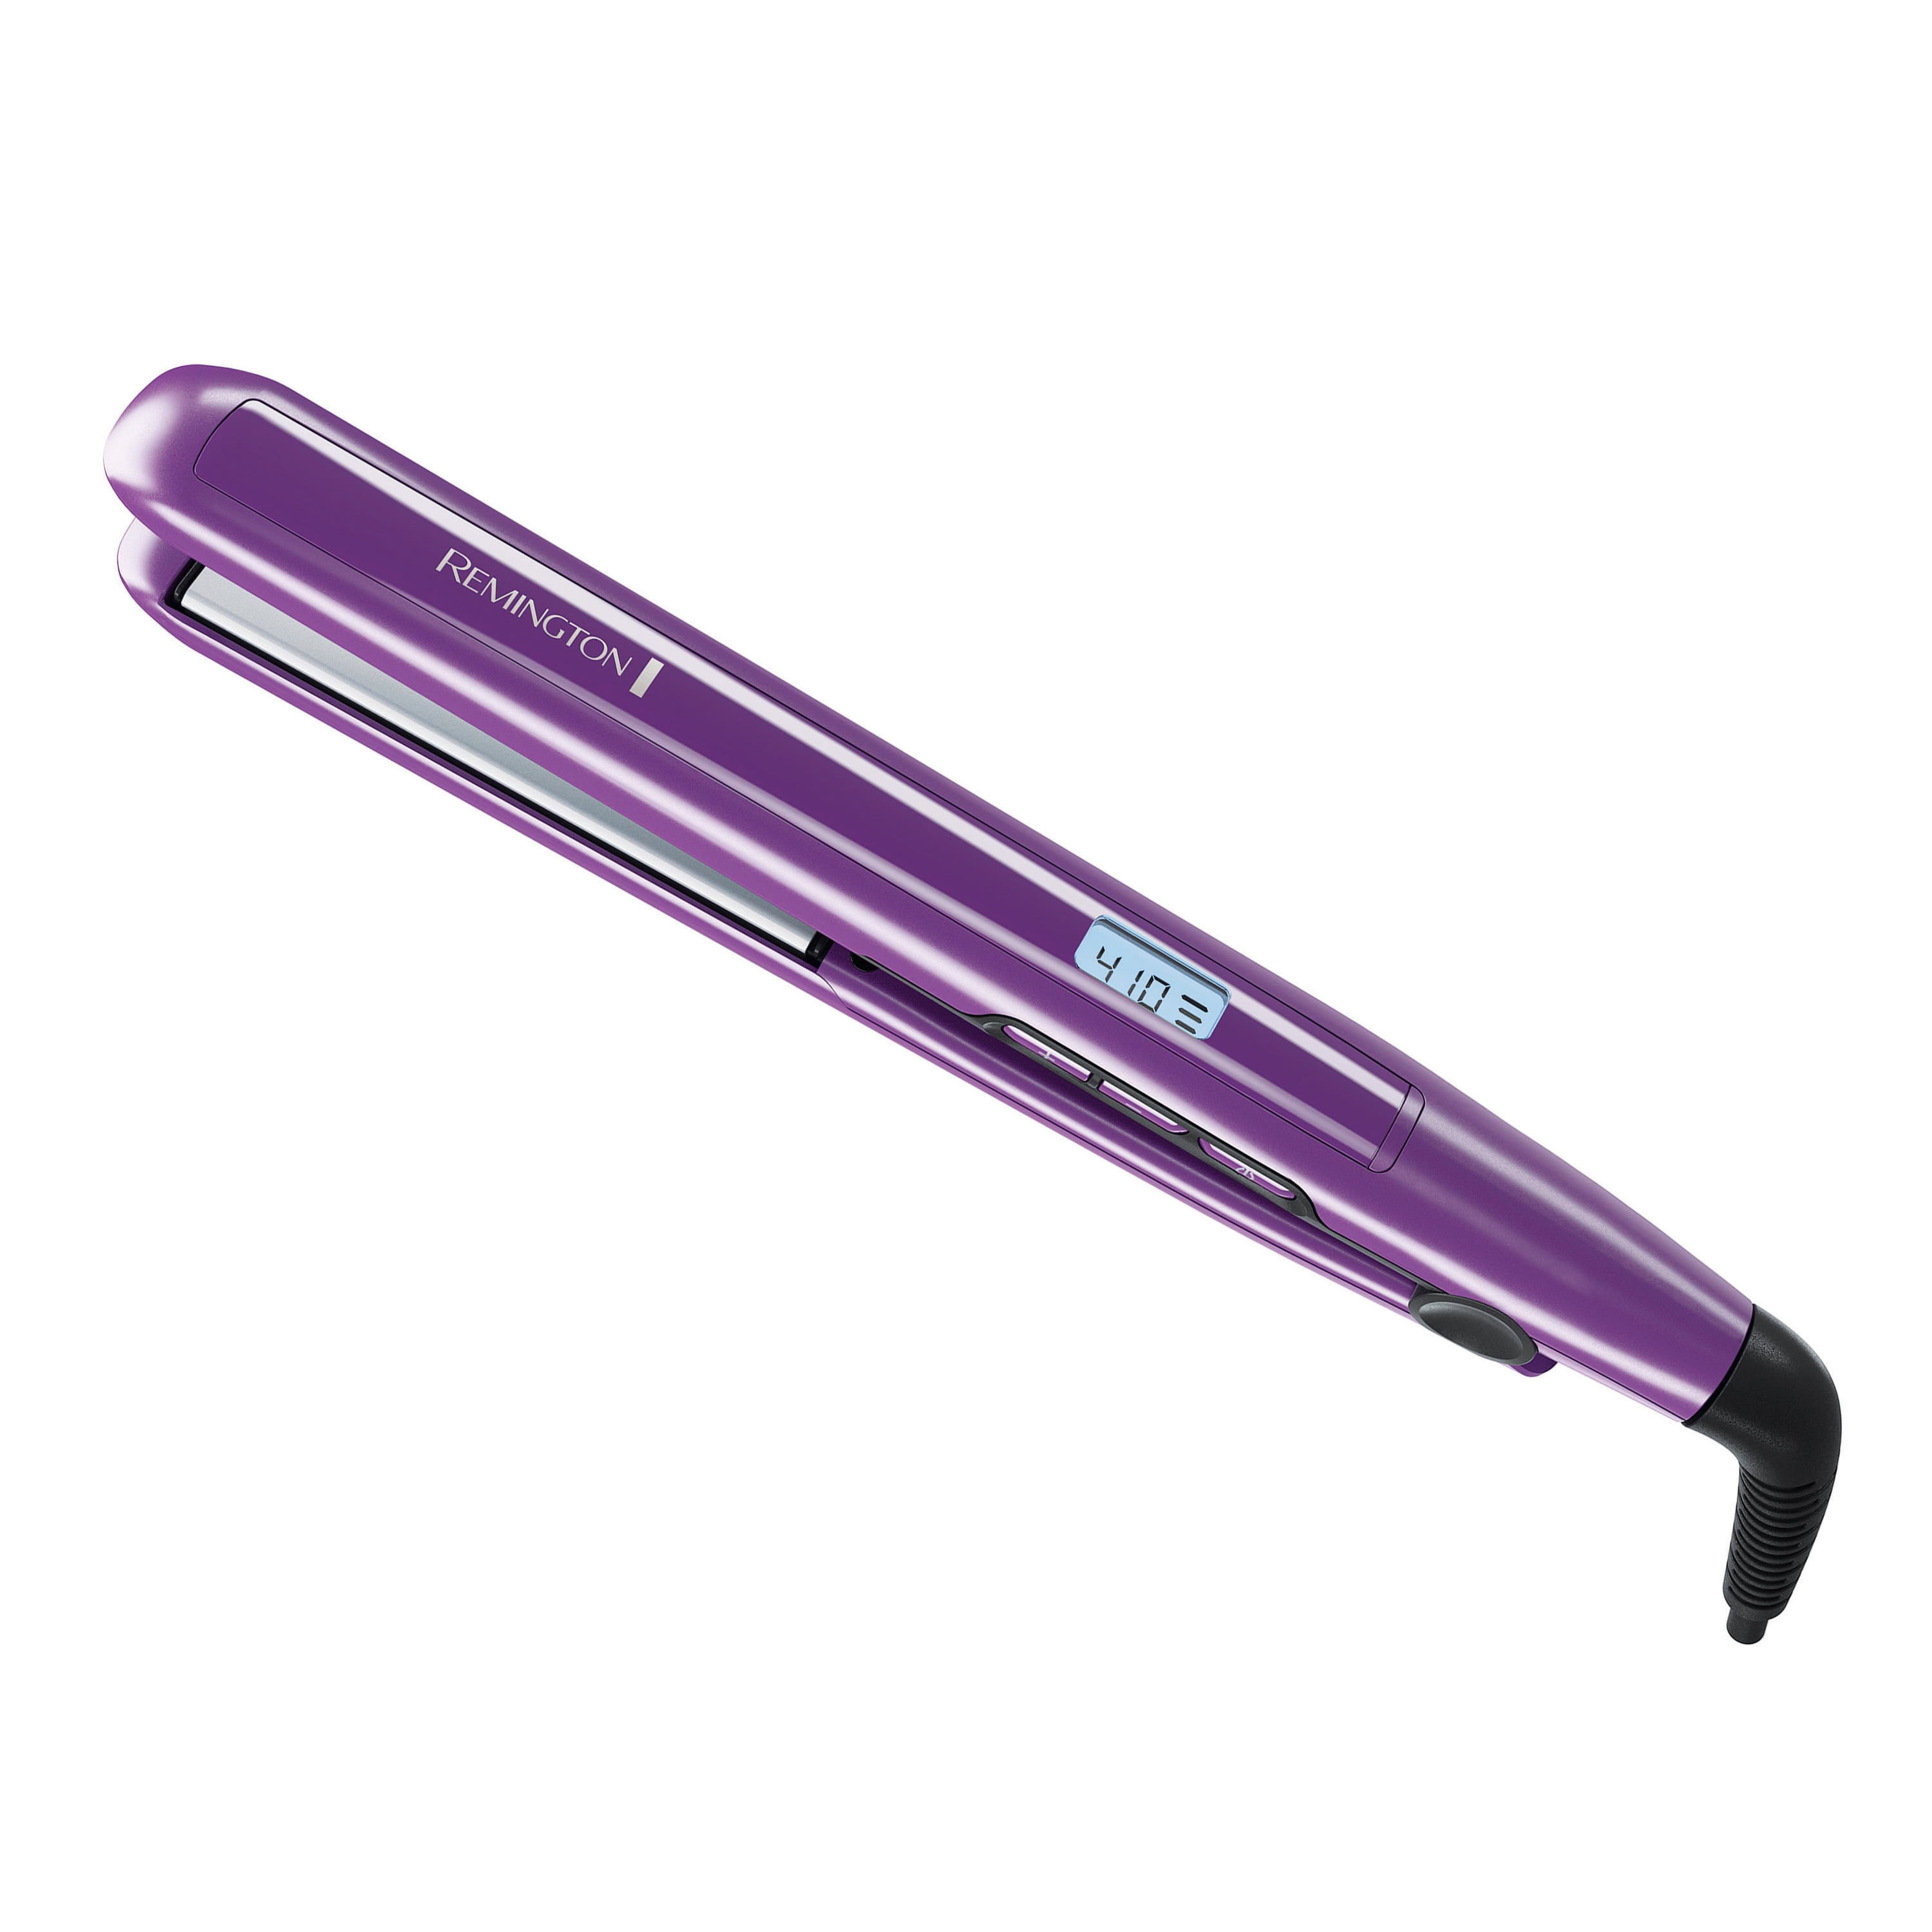 Remington S5500 1' Anti-Static Flat Iron with Floating Ceramic Plates and Digital Controls, Hair Straightener, Purple